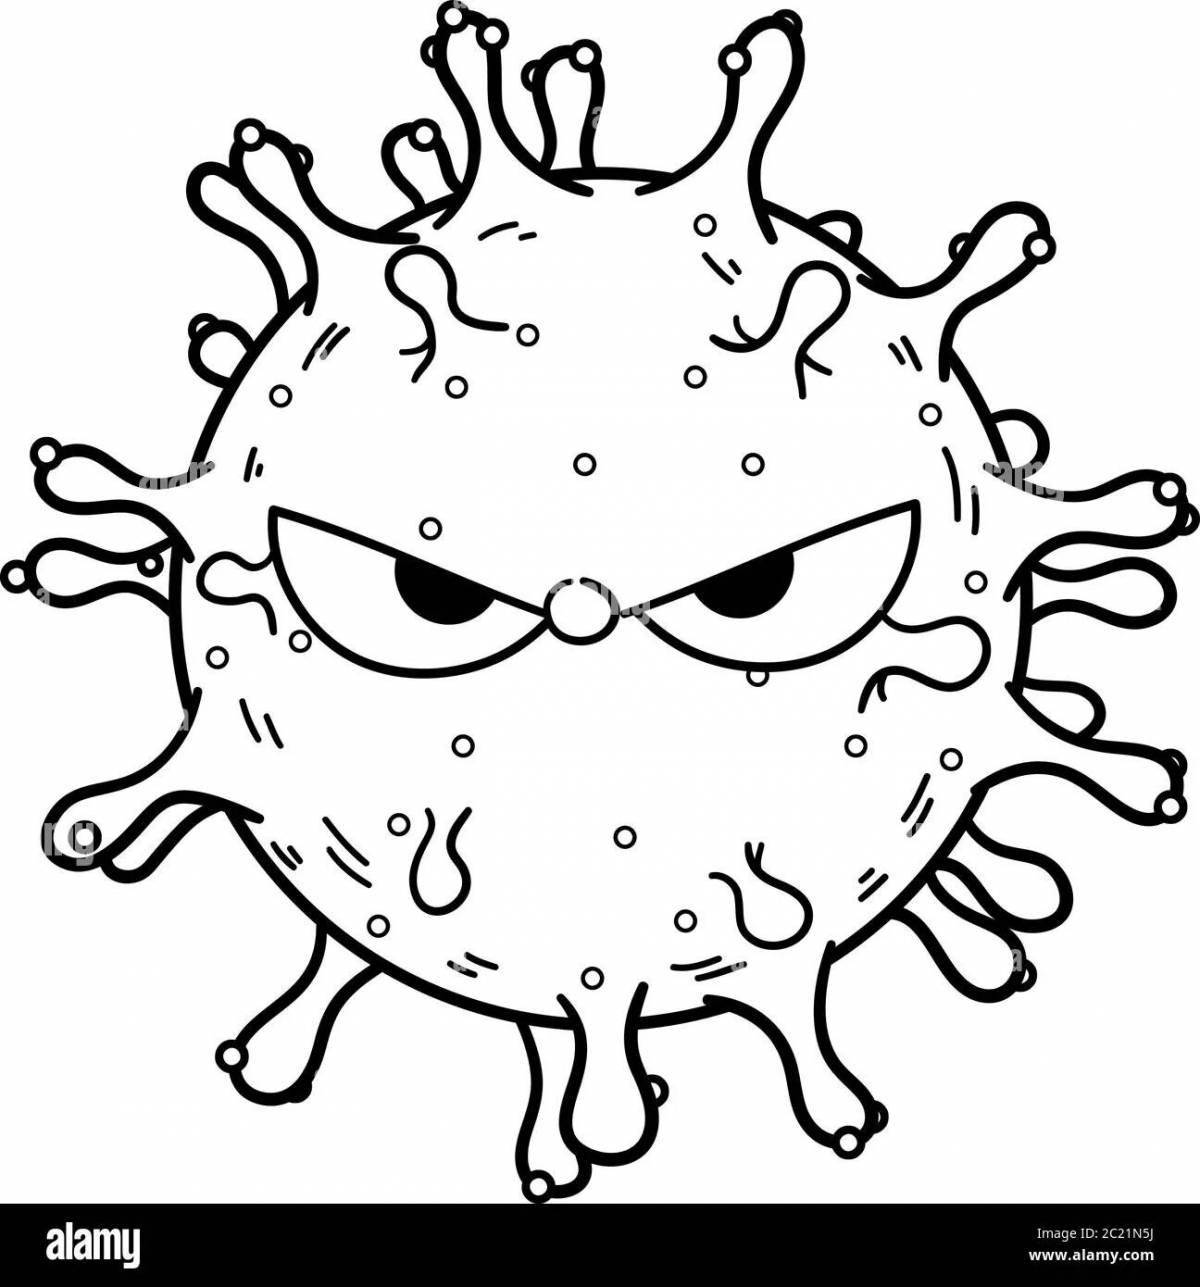 Adorable microbes and bacteria coloring page